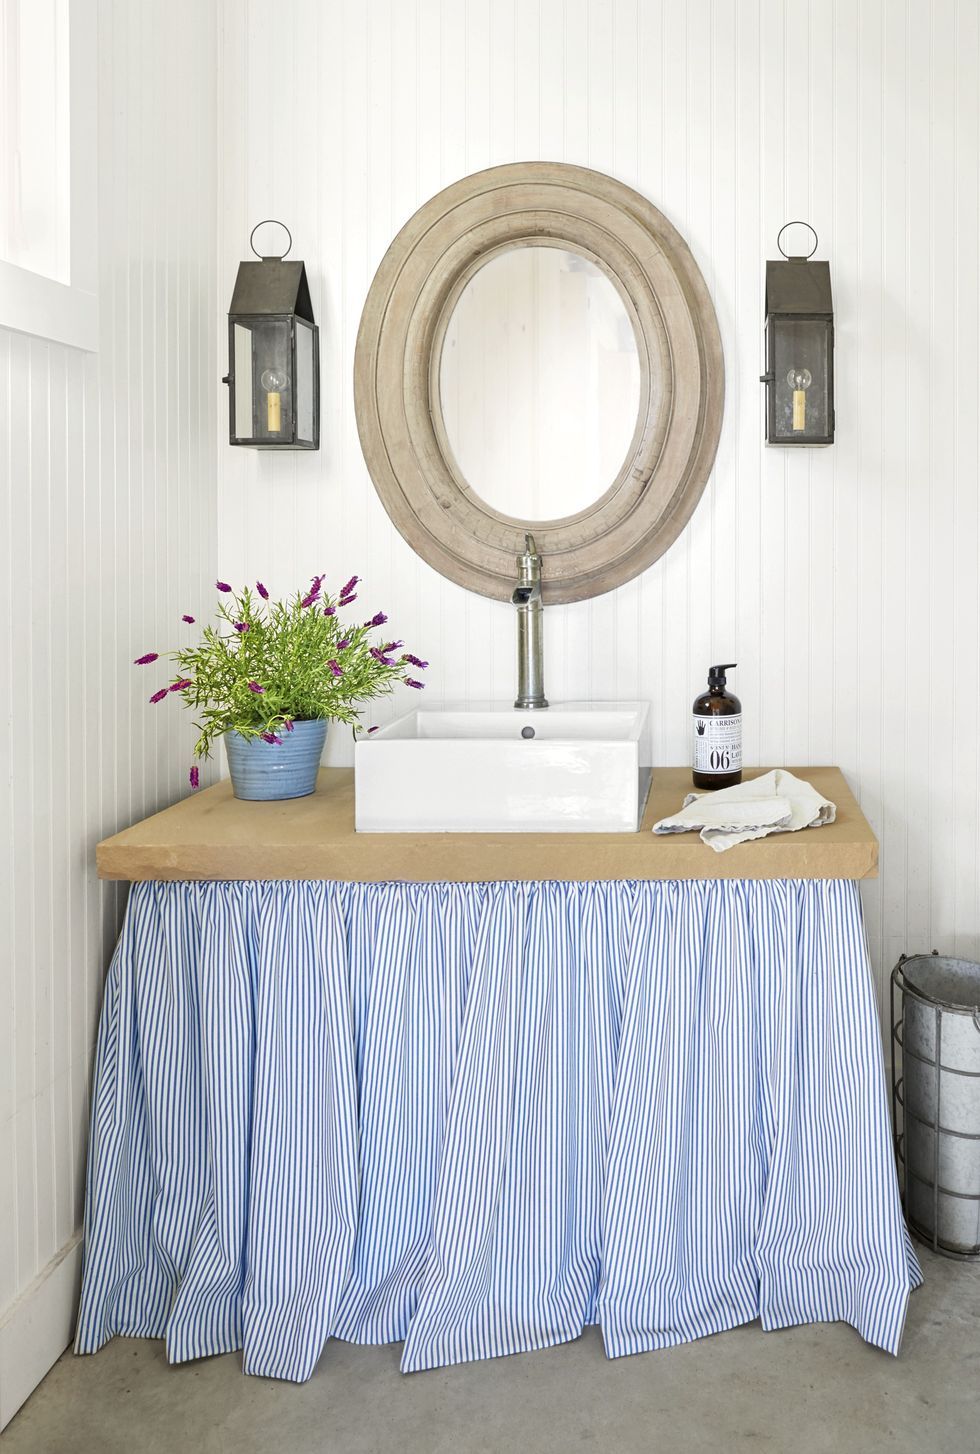 Skirted sink with blue and white striped fabric